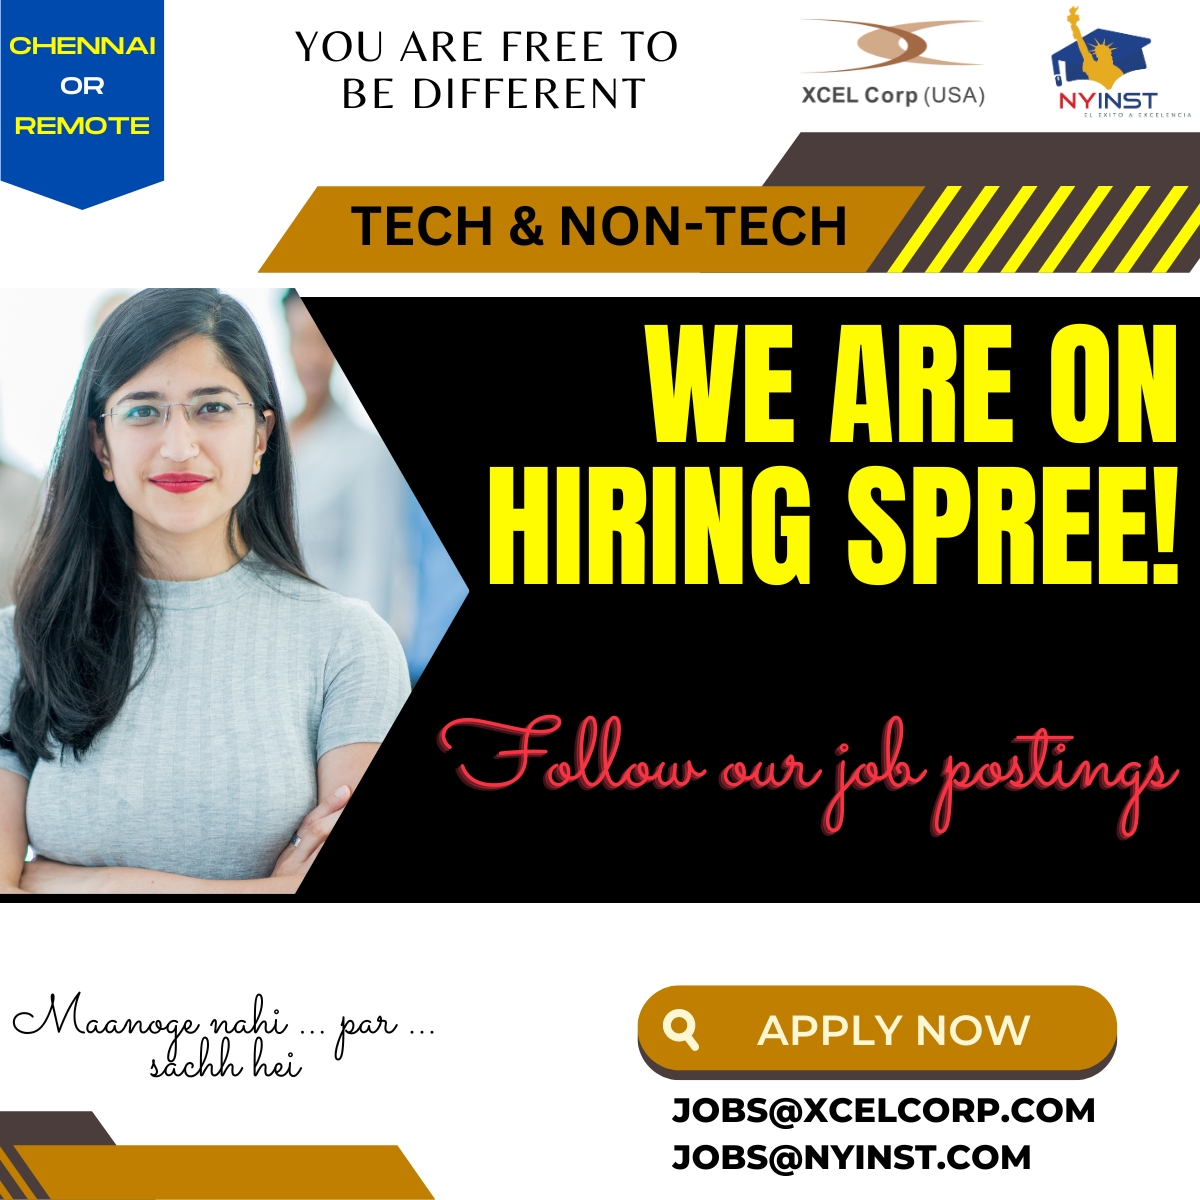 #hiring for Tech & Non-Tech Candidates
𝗪𝗼𝗿𝗸 𝗣𝗹𝗮𝗰𝗲: Onsite/Remote

📩 Drop your CV's at: jobs@xcelcorp.com  / jobs@nyinst.com

#hiringimmediately #freshershiring #hiringnow #hrcareers #candidates #itrecruiters #itjobsearch #techjobs #nontech #jobfair2023 #bulkhiring